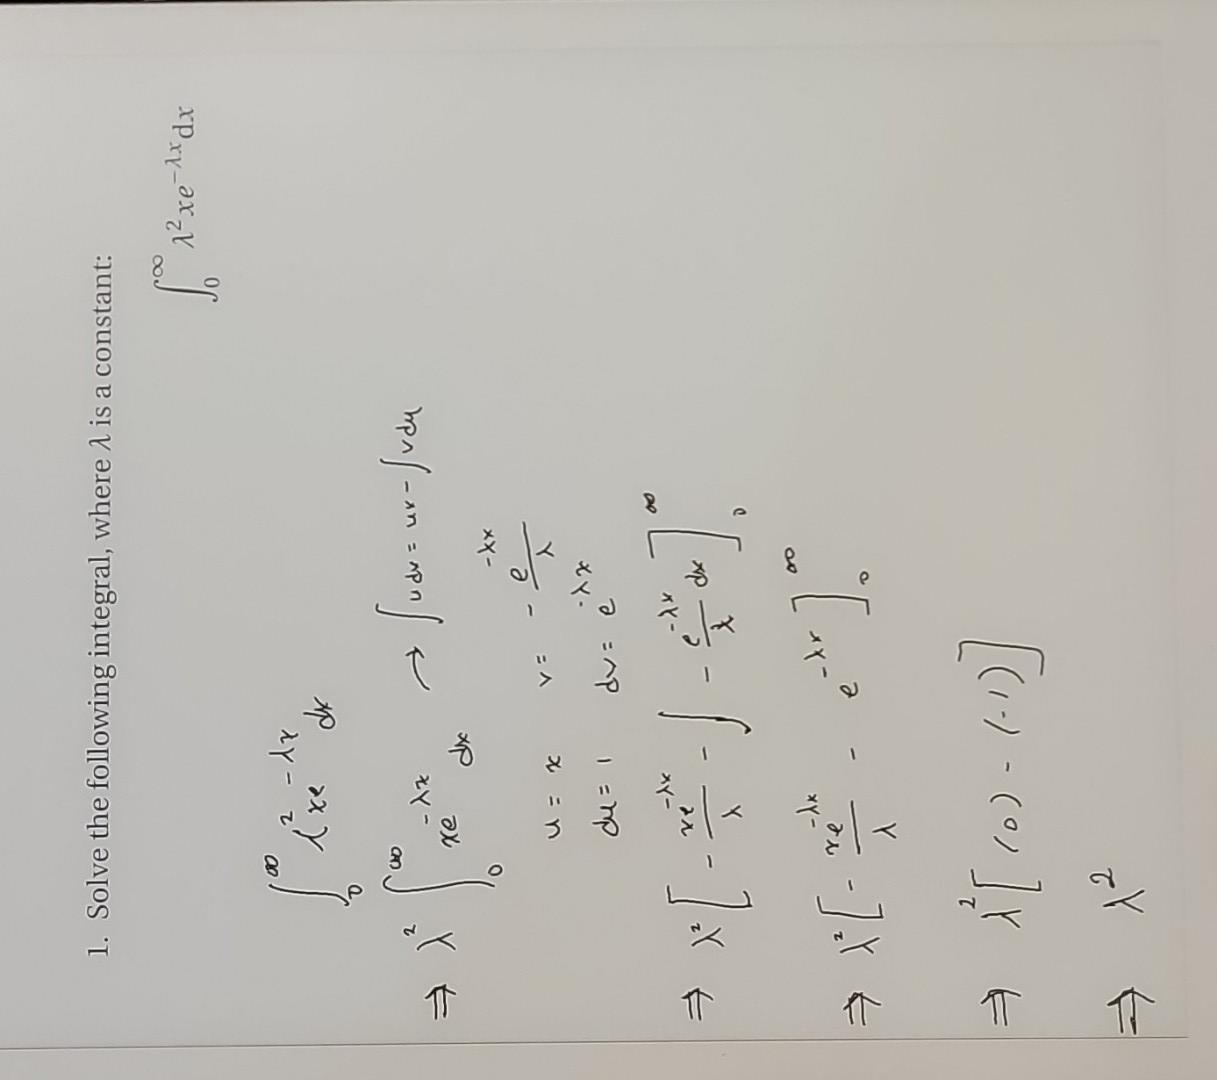 student submitted image, transcription available below